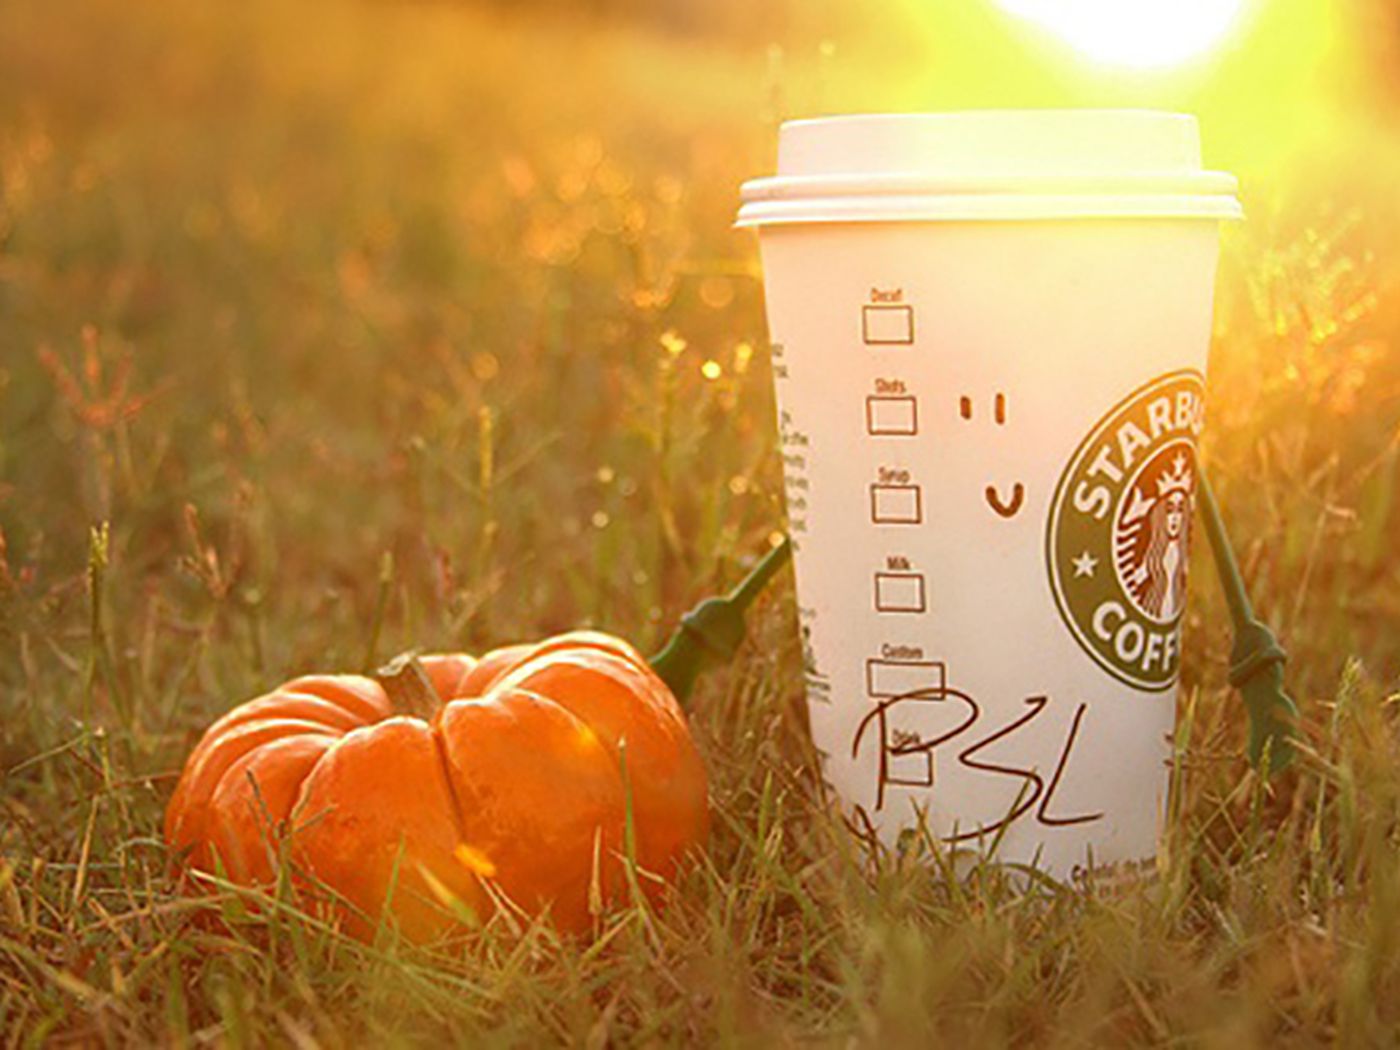 Starbucks' Pumpkin Spice Latte to Be Made With Real Pumpkin; Chef Inaki Aizpitarte Splits From Le Chabanais